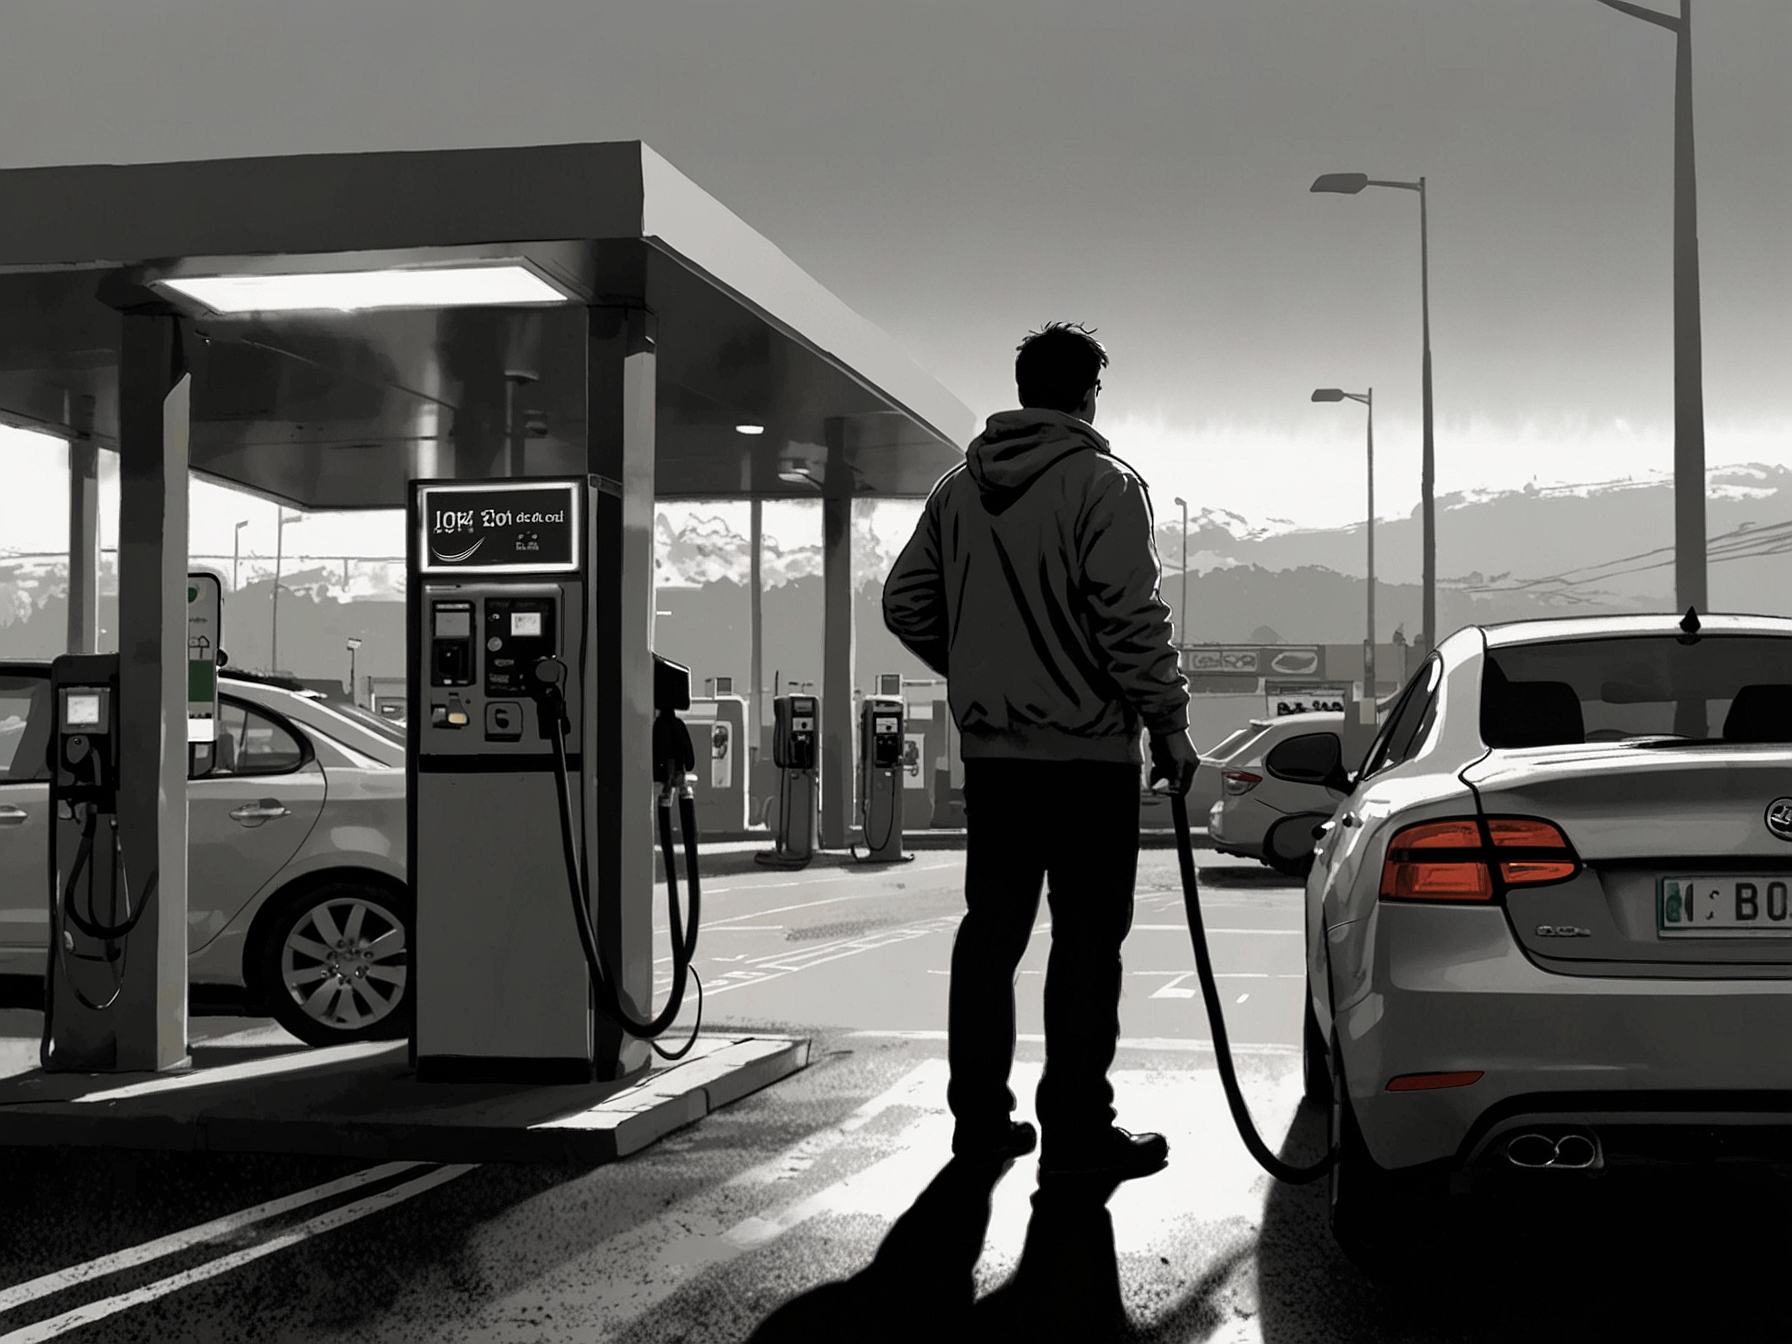 A frustrated driver filling up their car at an expensive UK diesel station, highlighting the struggle faced by motorists amid soaring diesel prices.